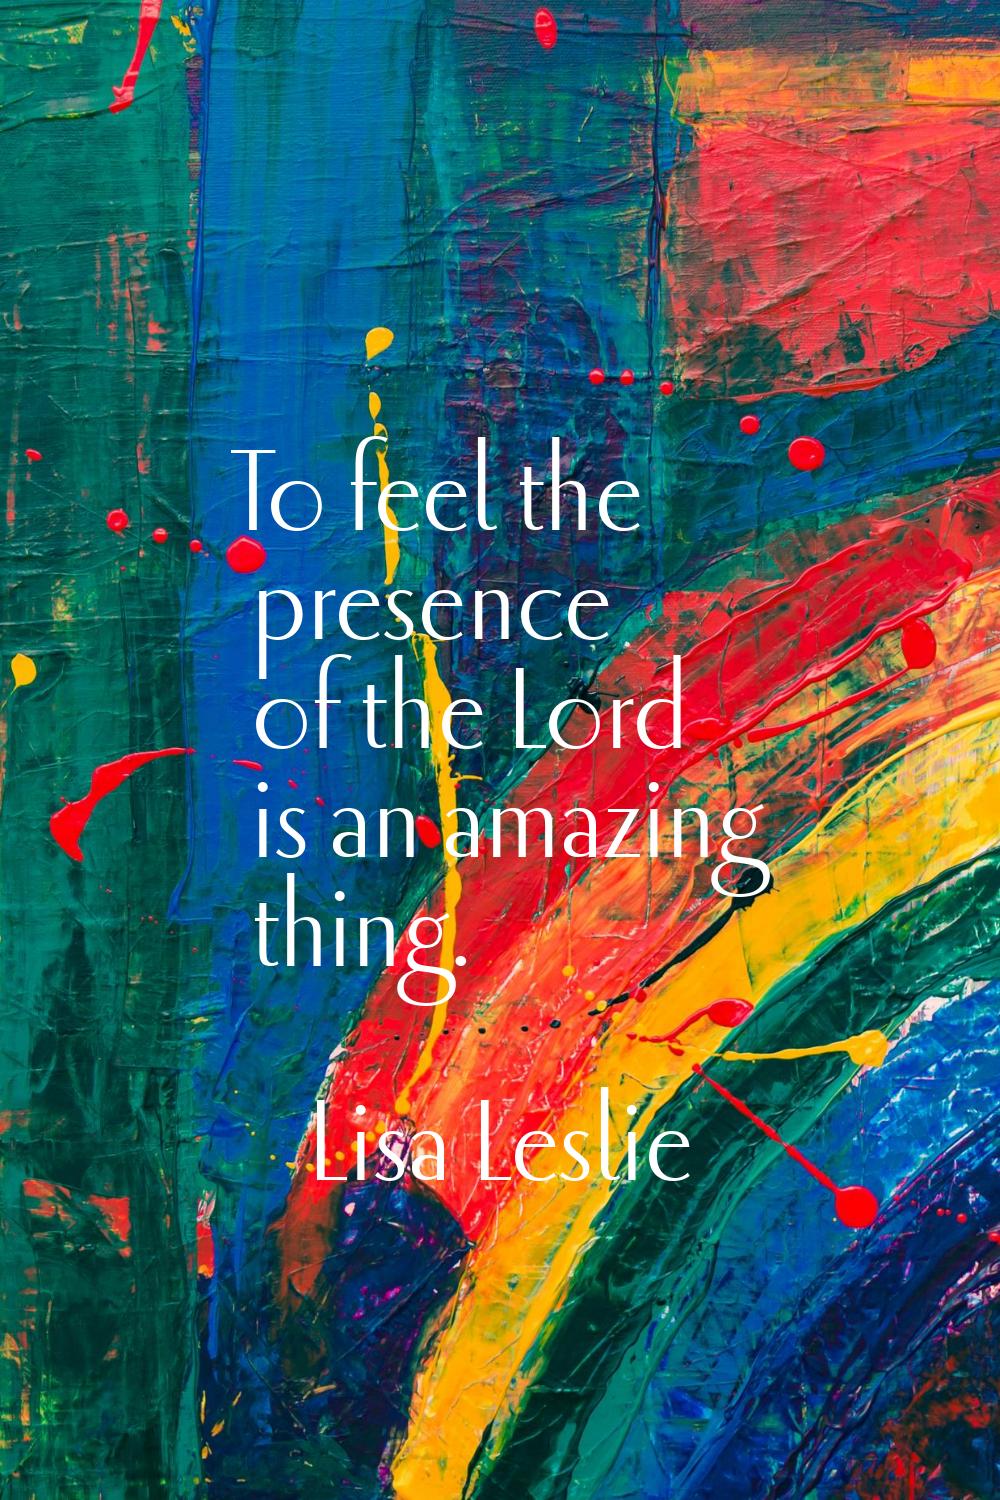 To feel the presence of the Lord is an amazing thing.